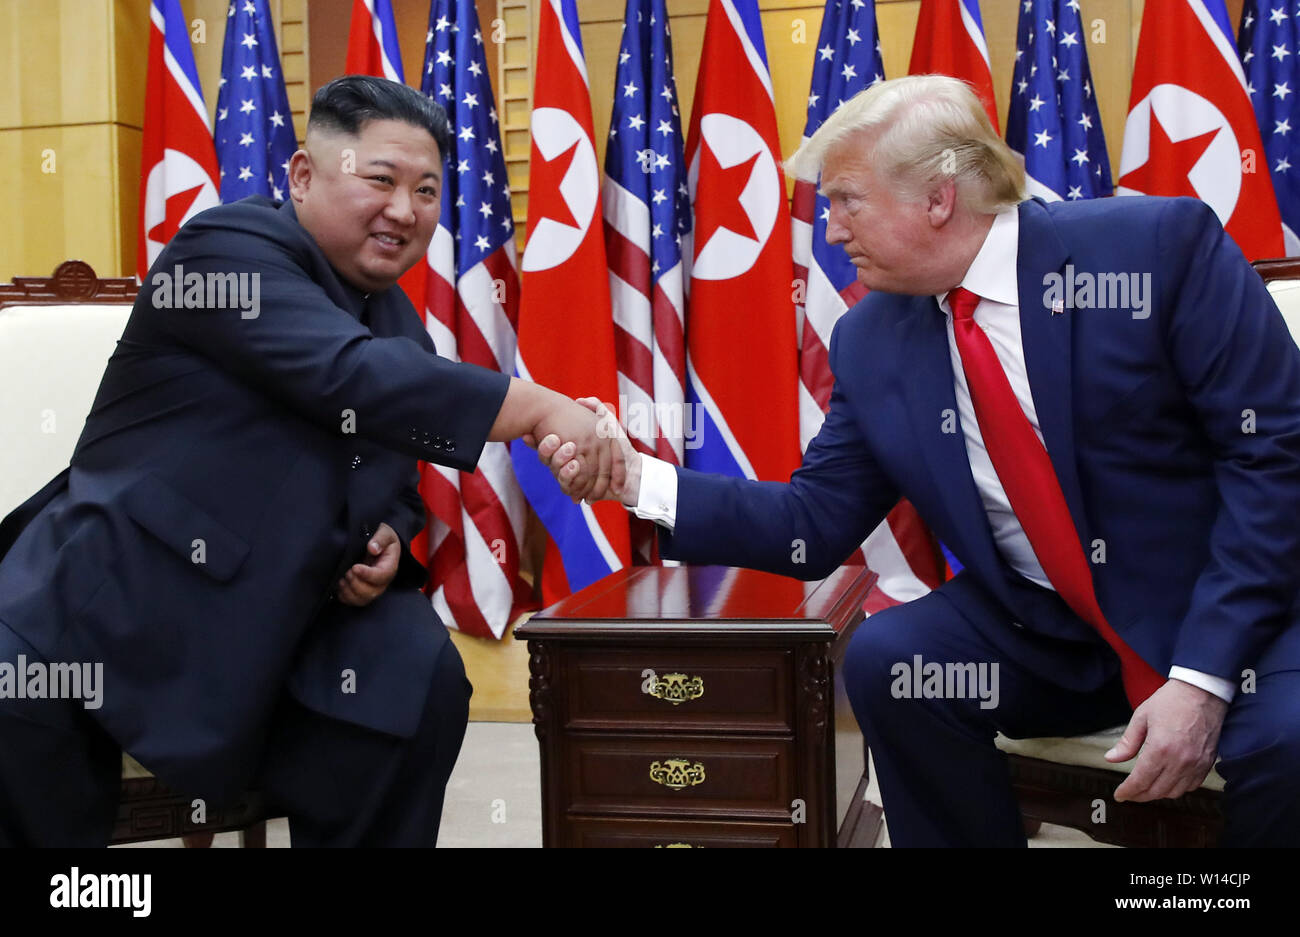 Panmunjom, South Korea. 30th June, 2019. US President Donald Trump (R) and Kim Jong Un, top leader of the Democratic People's Republic of Korea (DPRK), meet at the Freedom House, a South Korean building in the inter-Korean border village of Panmunjom, June 30, 2019. Credit: NEWSIS/Xinhua/Alamy Live News Stock Photo